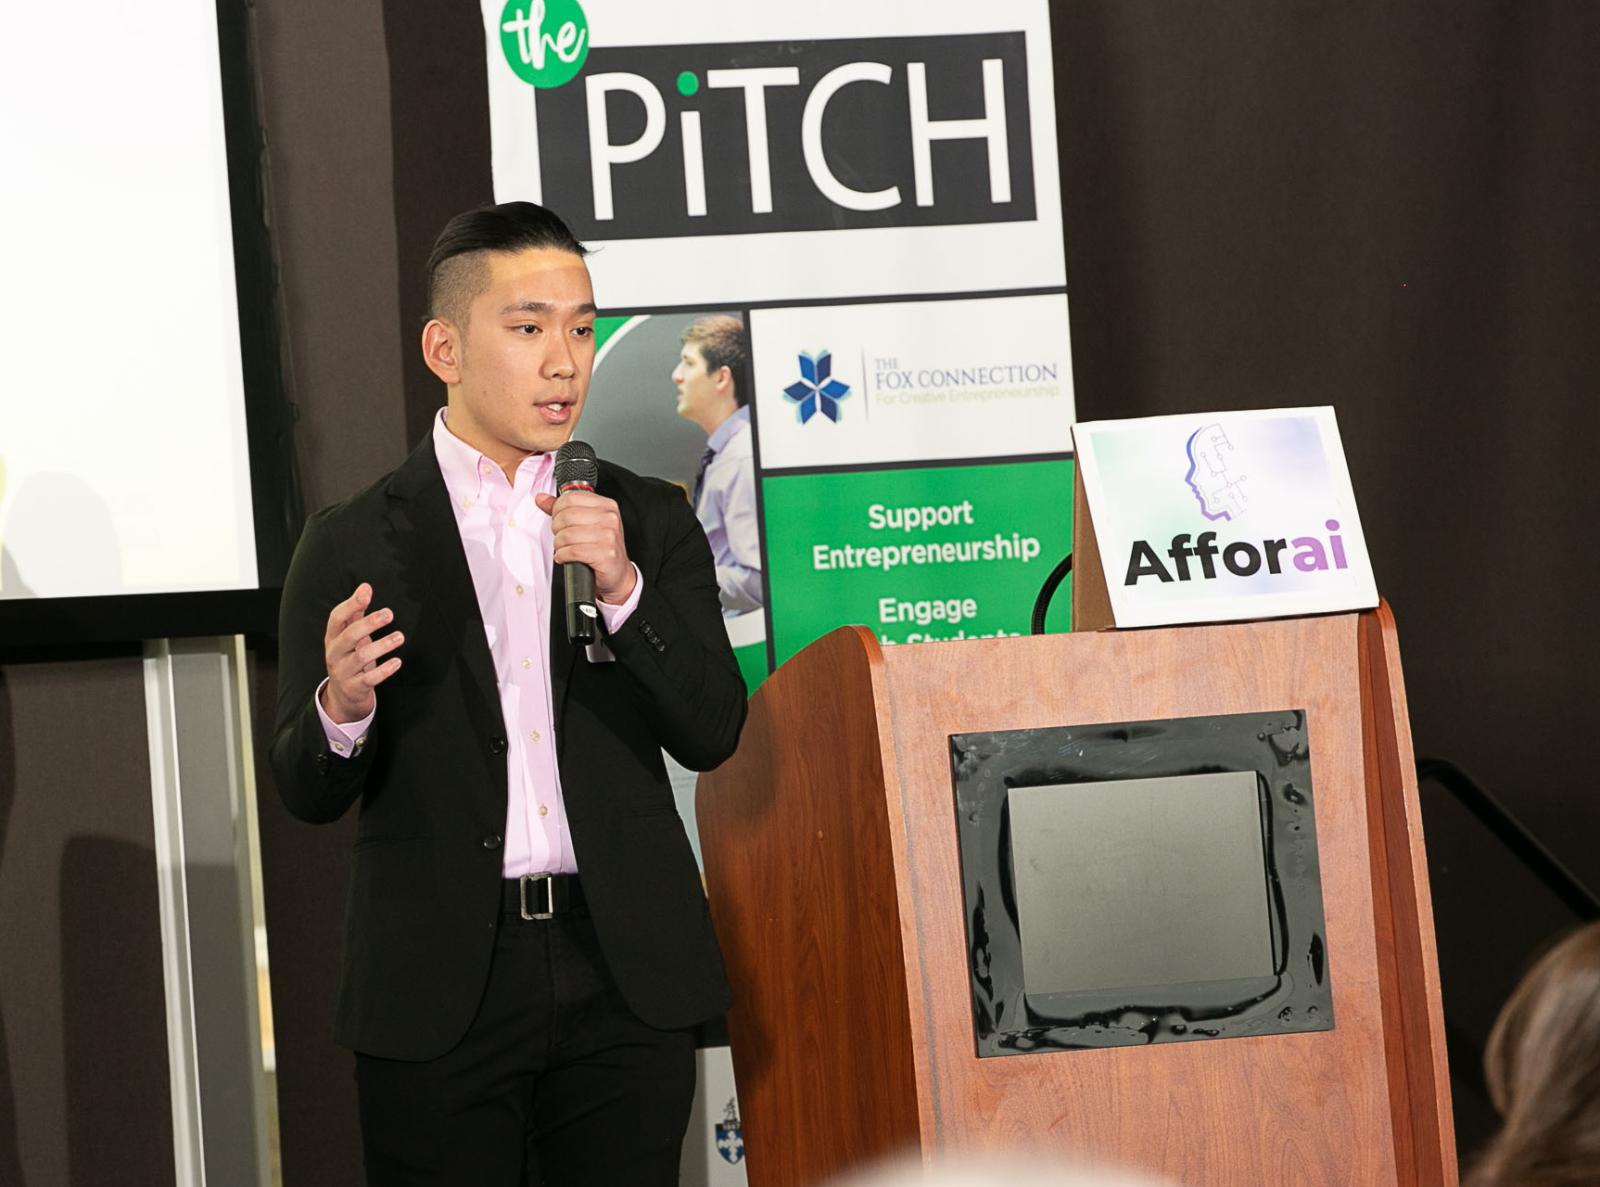 Alec Nguyen delivers his Afforai pitch during The Pitch competition in the spring.